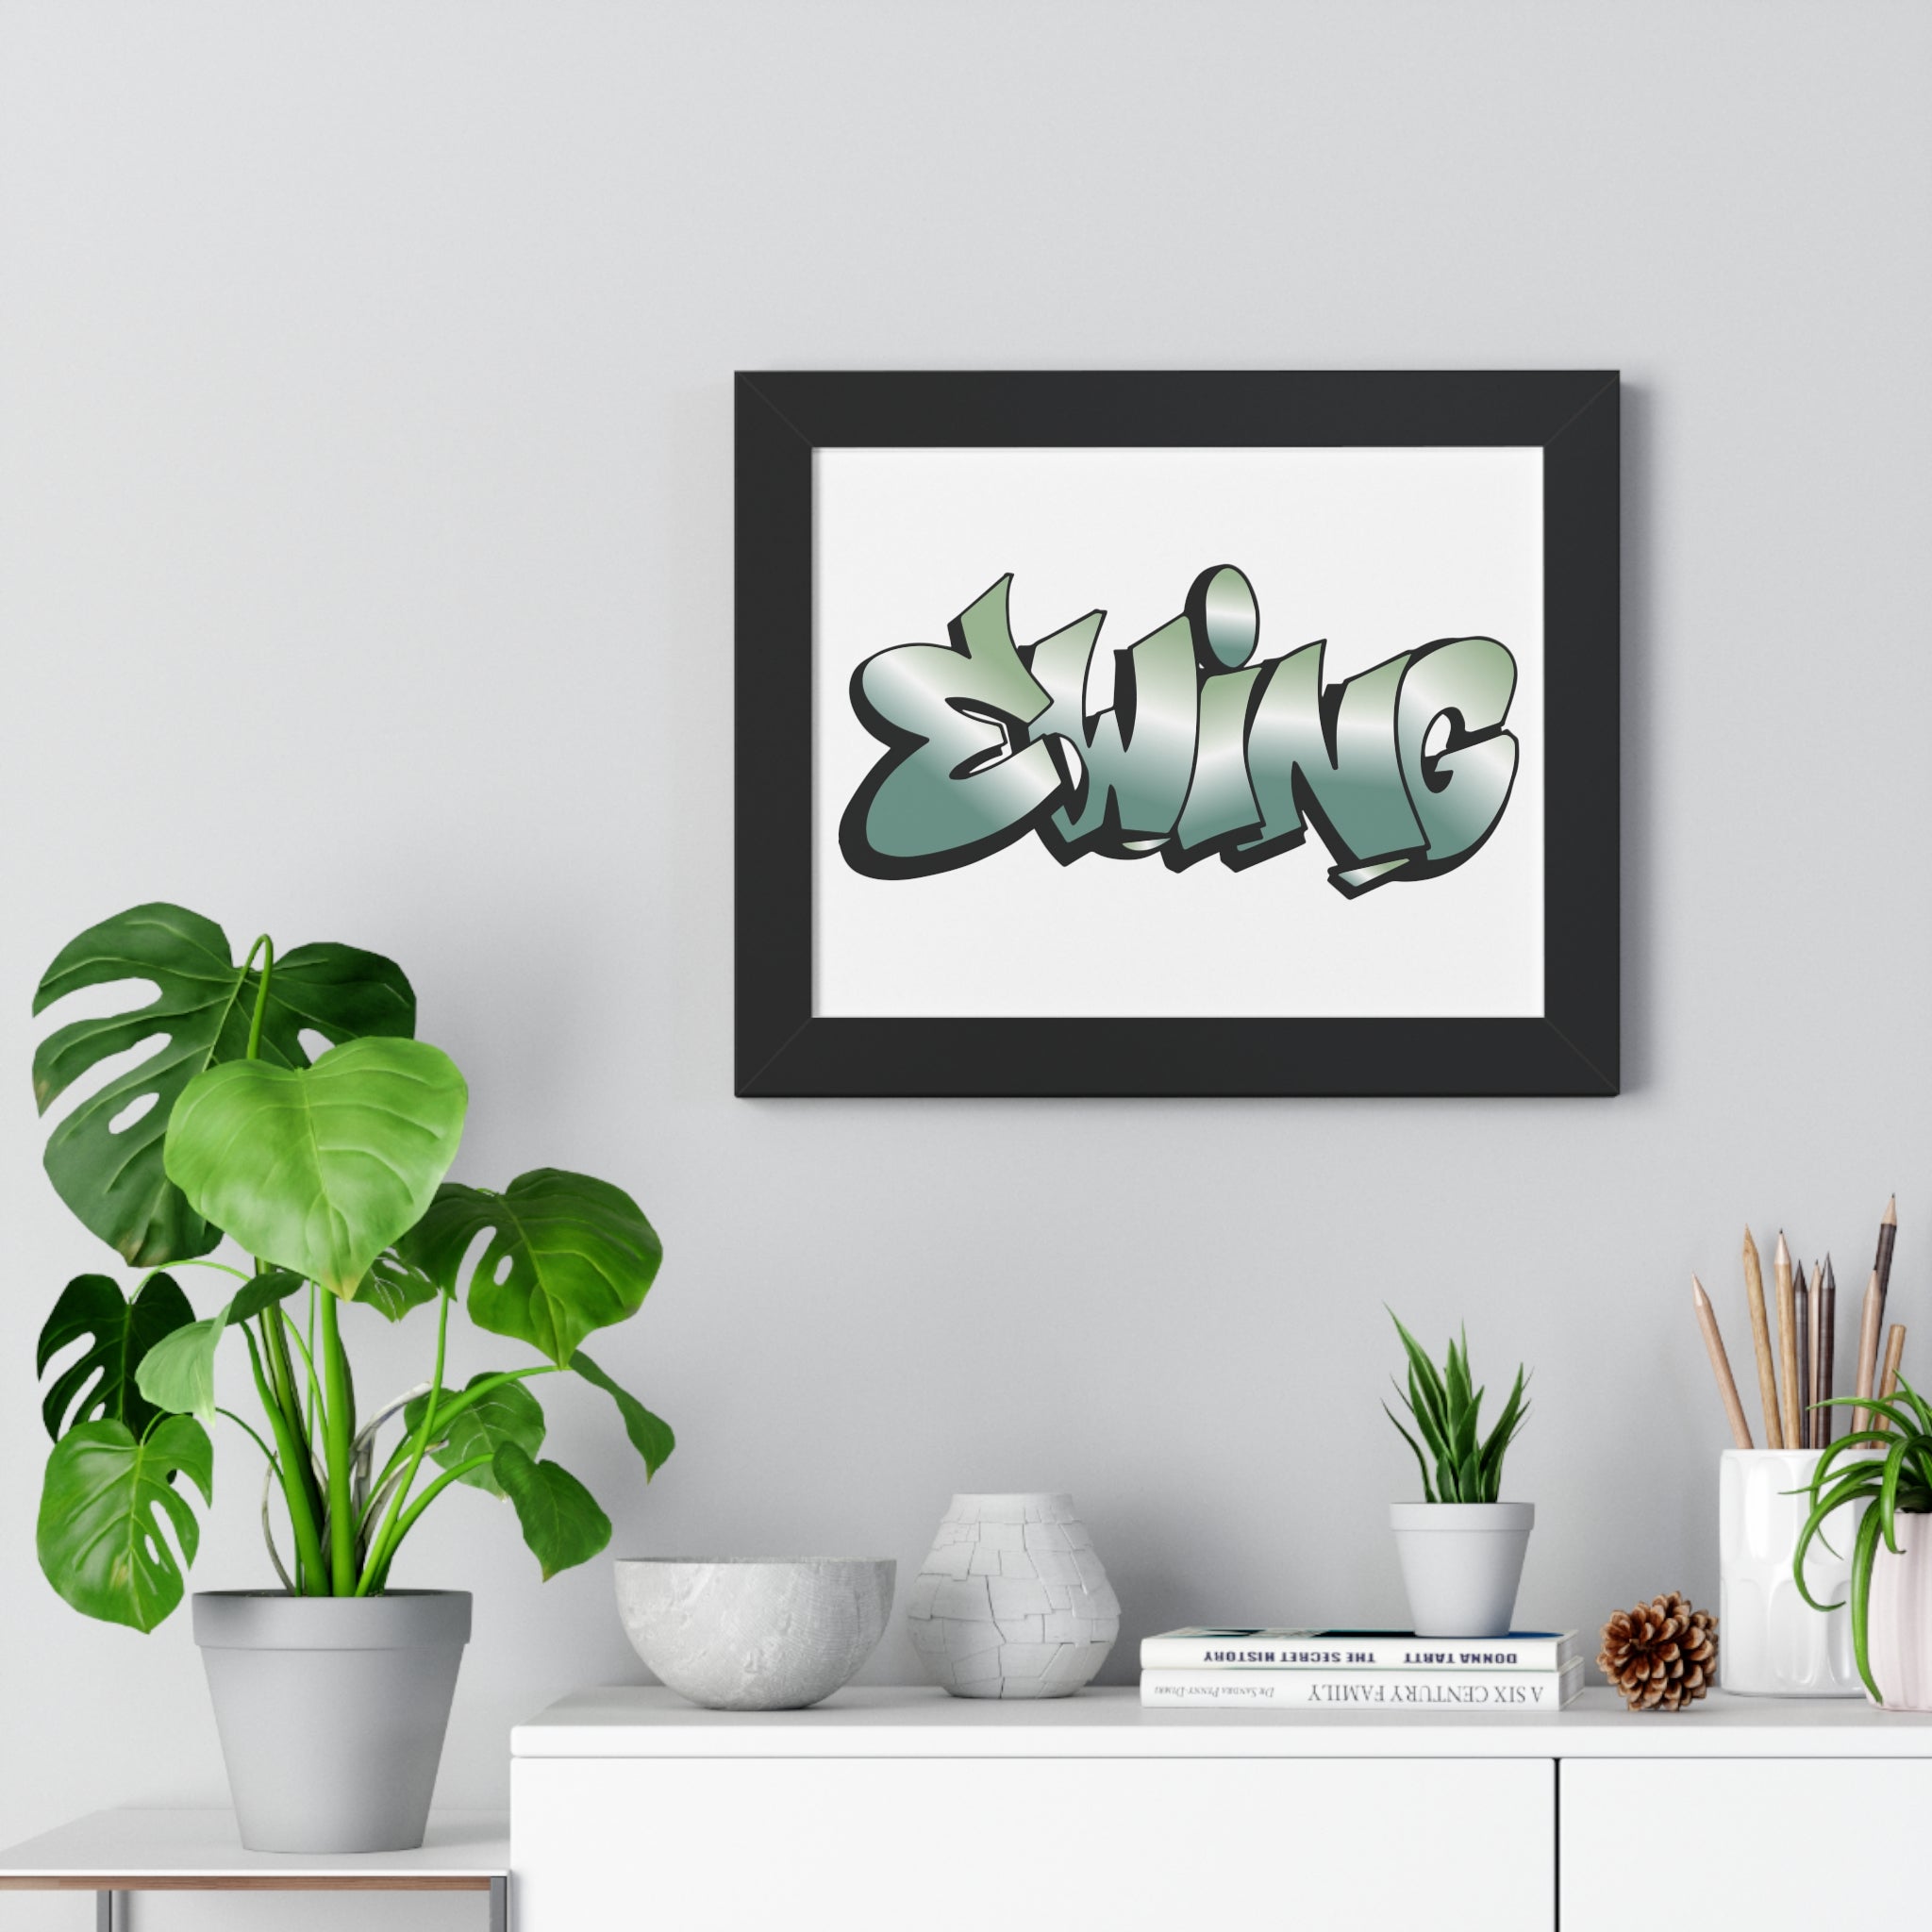 Ewing x Cope Framed Horizontal Poster